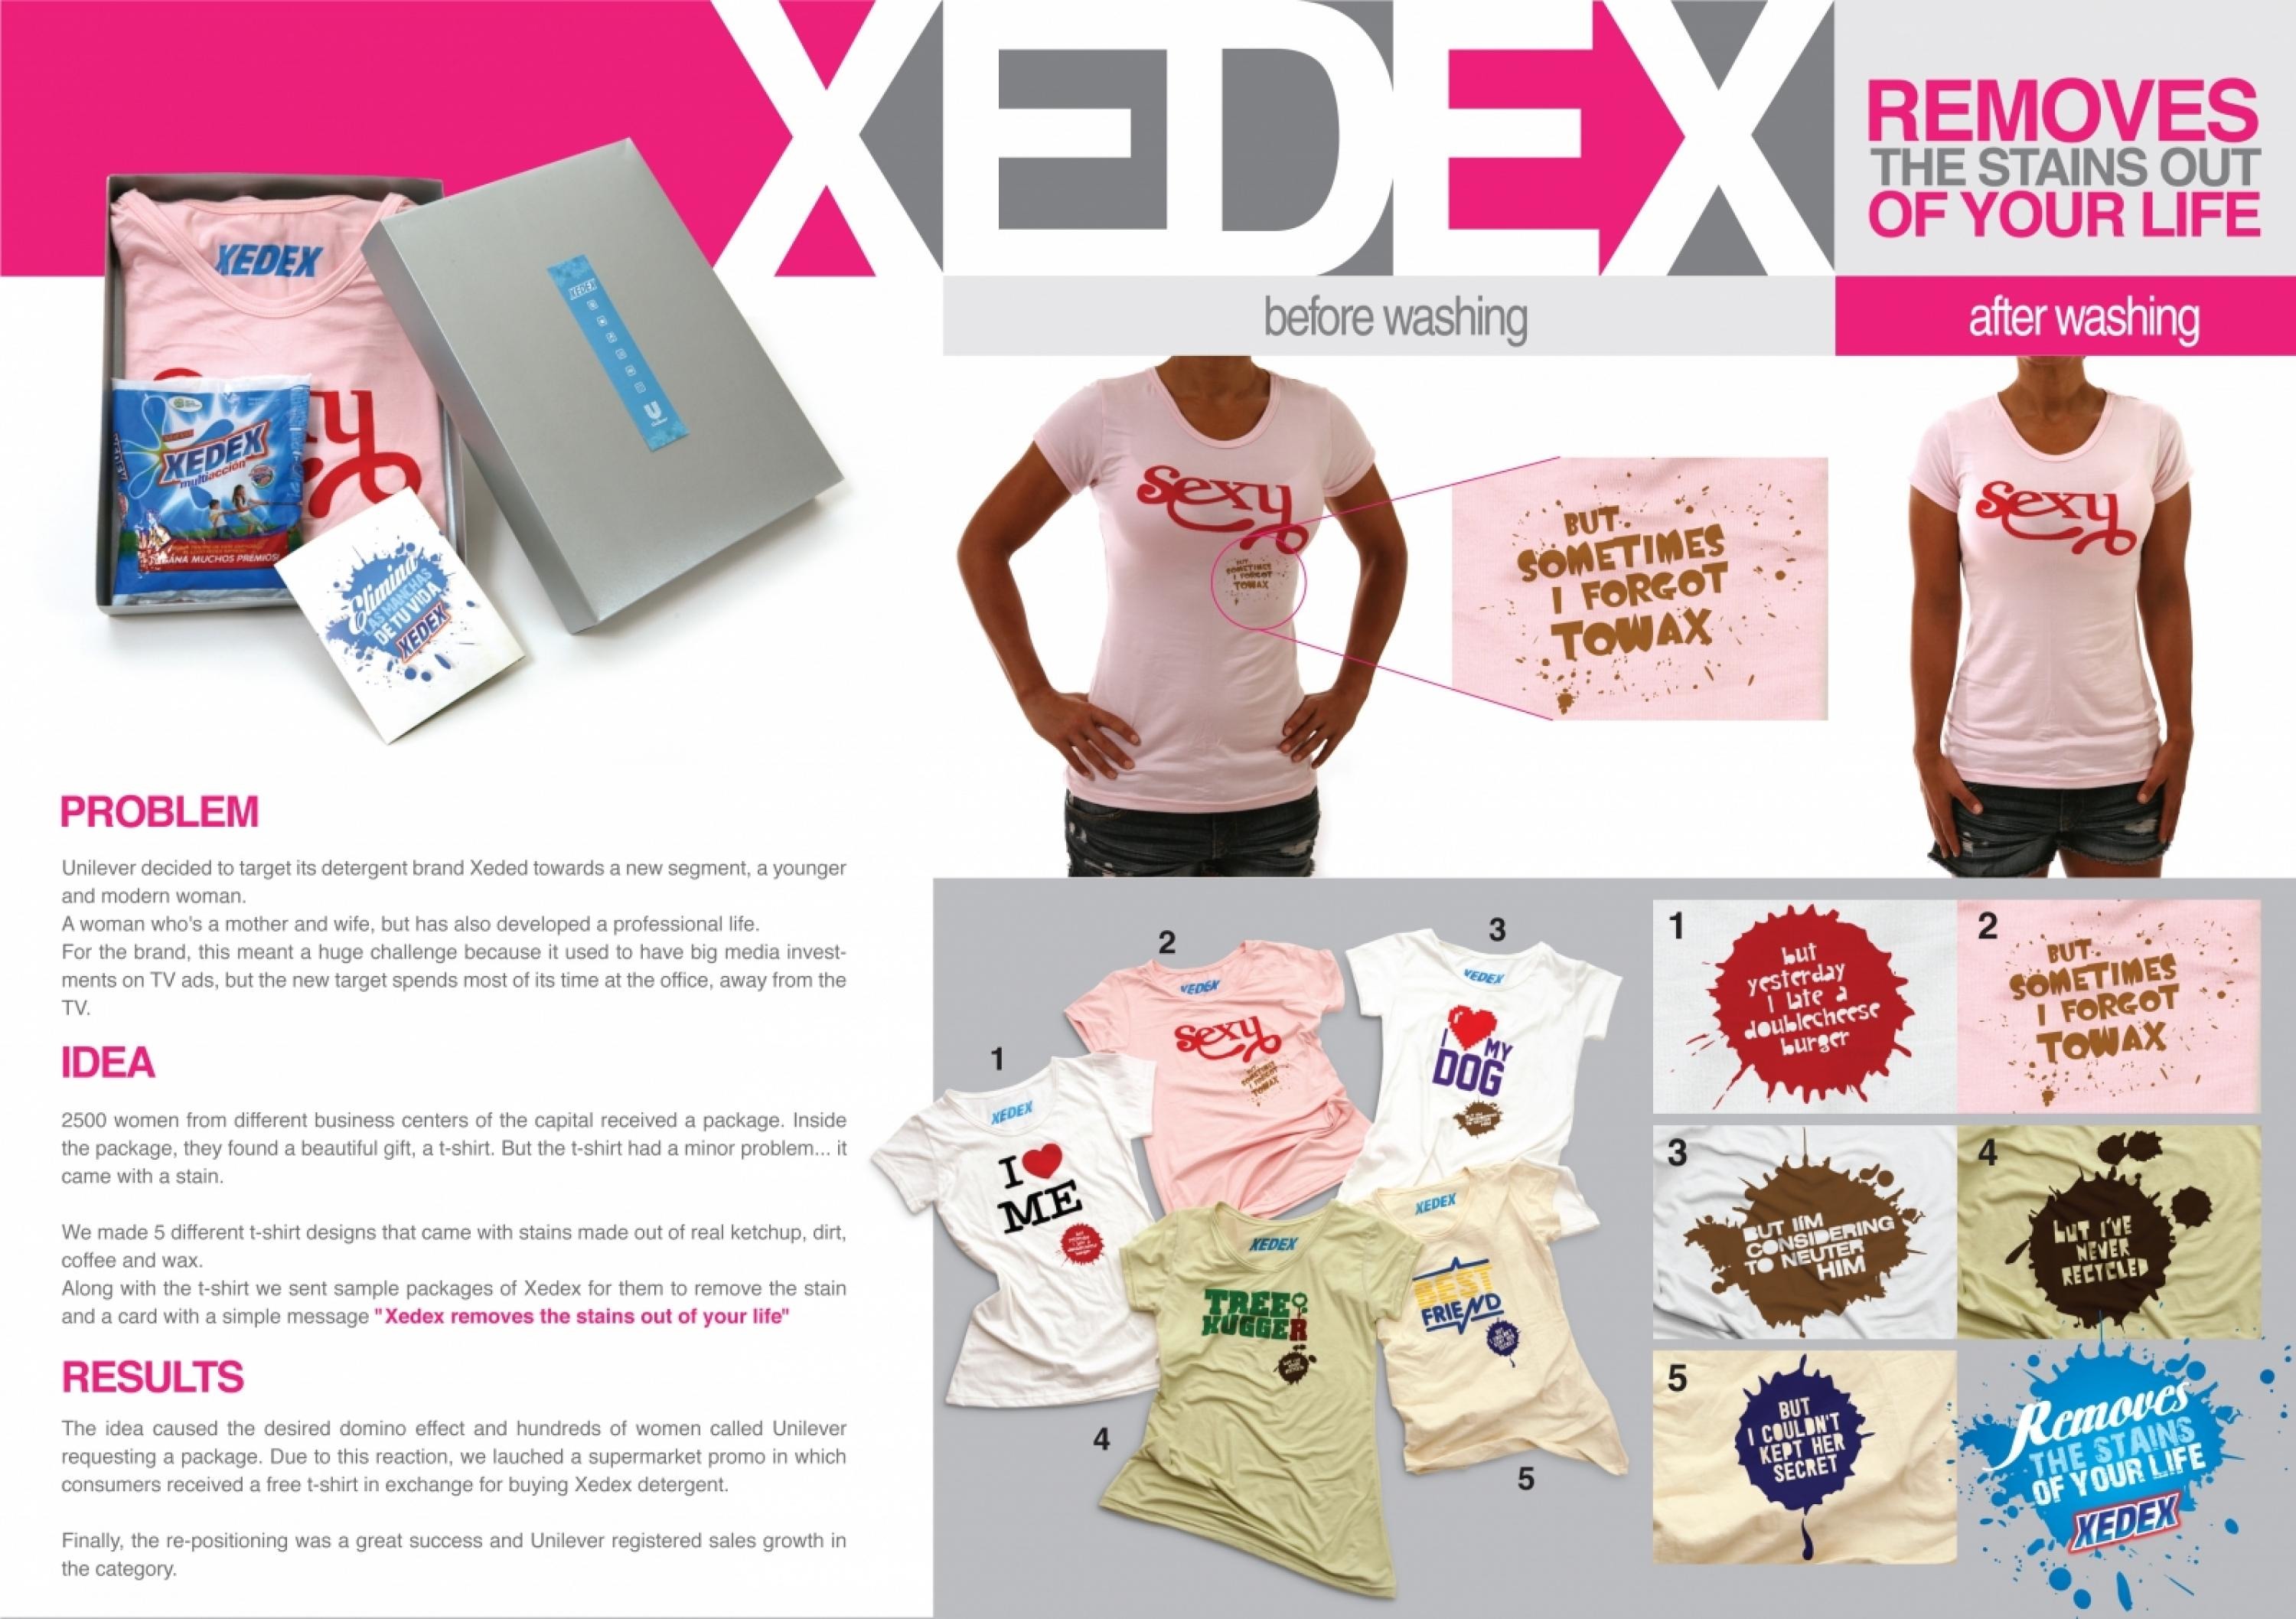 XEDEX REMOVES THE STAINS OUT OF YOUR LIFE